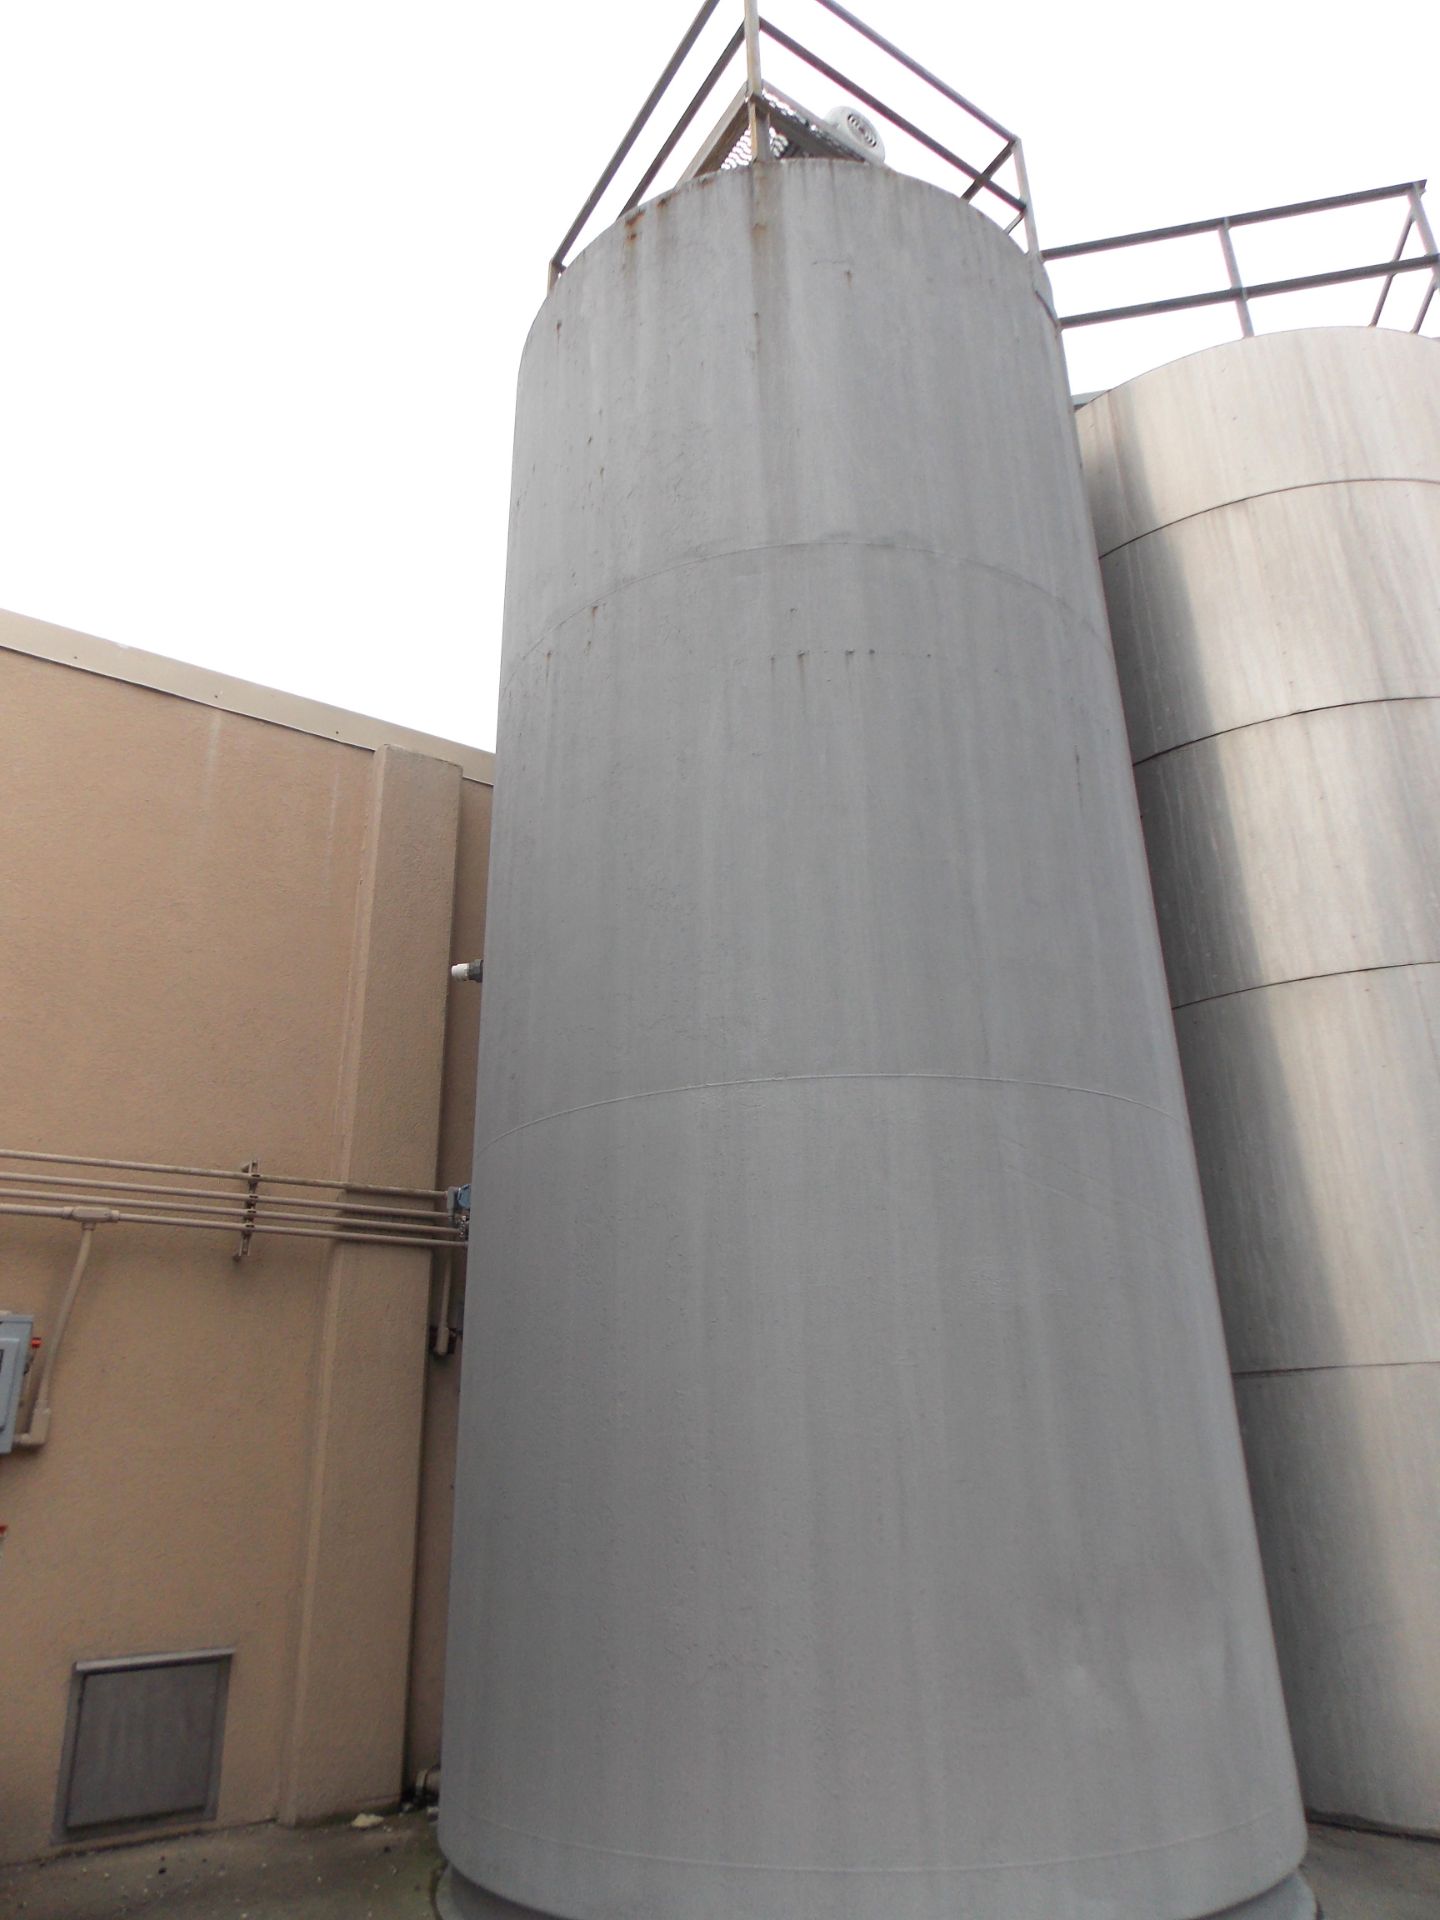 Dairy Craft 6000 Gallon Vertical Silo with Agitator; Serial: 77J3387 Stainless Steel Construction - Image 2 of 9